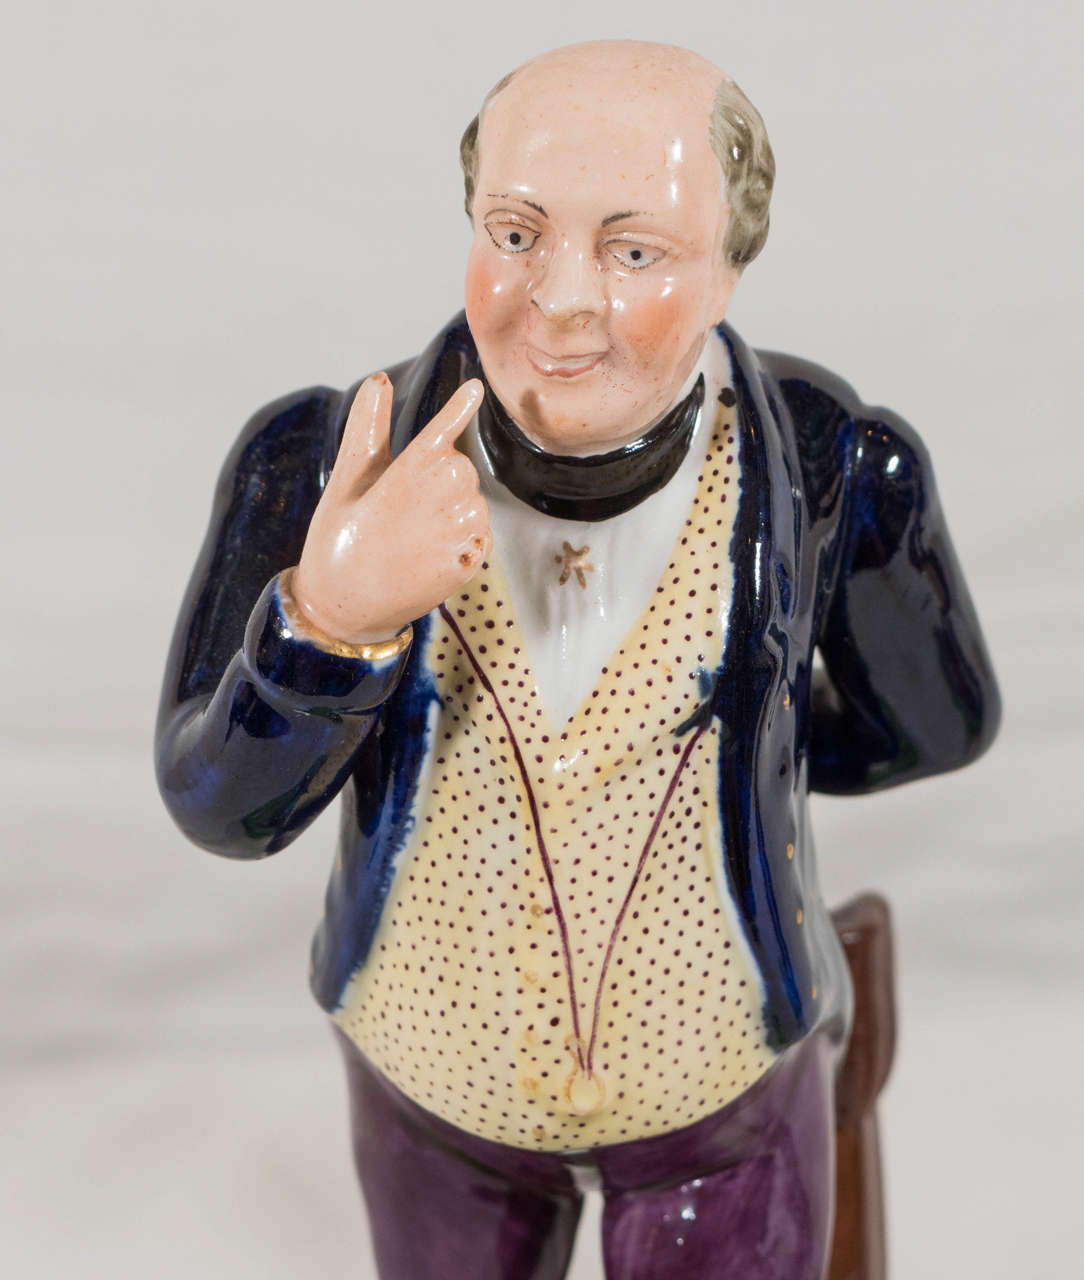 We are pleased to offer this amusing pair of 19th century Staffordshire figures of the Dickens' characters Mr. Pickwick and Sam Weller of the very popular Pickwick Papers. The figures were made by Dudson Pottery, circa 1840. The  figures are well